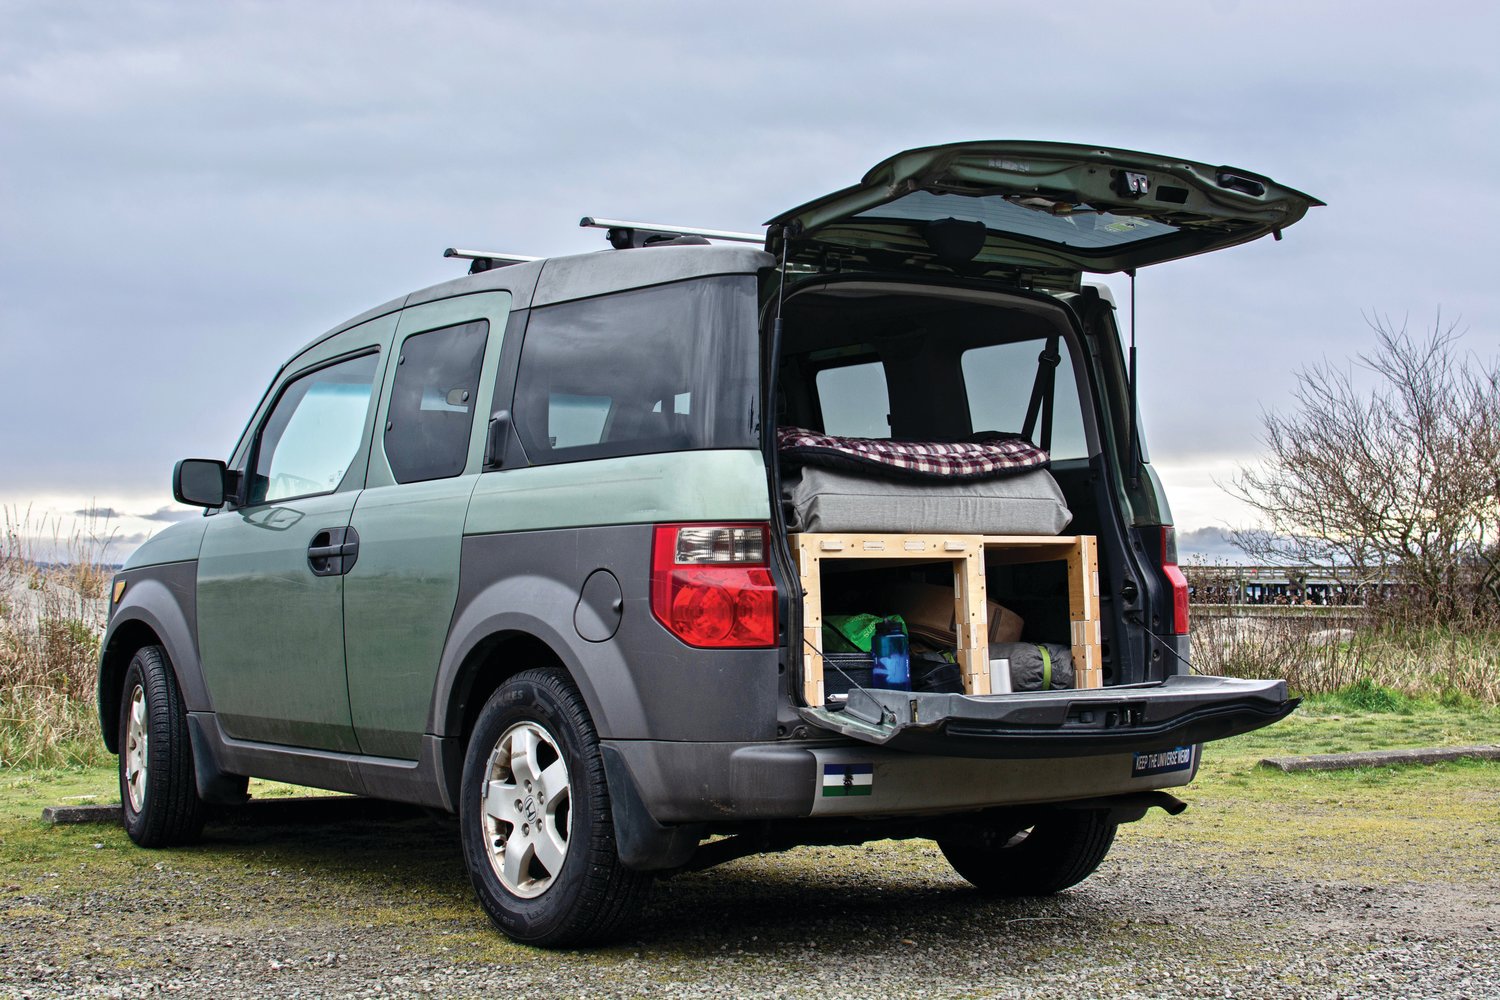 Camp N Car’s flagship product, the Trunk Bunk offers campers the ability to sleep in their cars more comfortably.